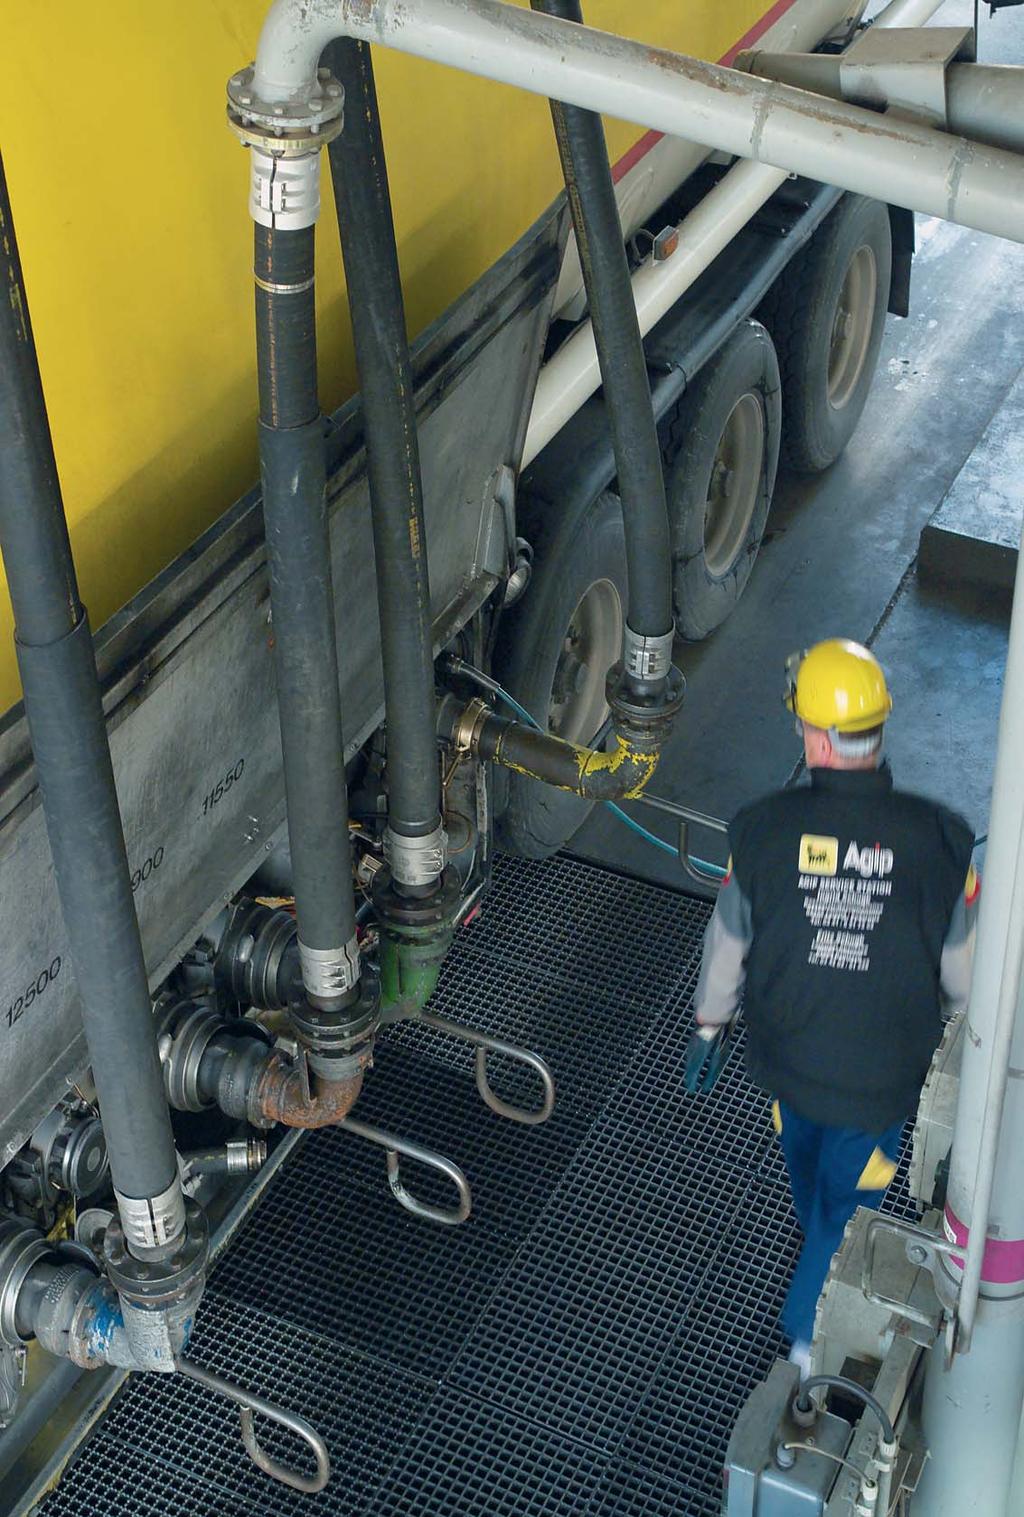 [02] [Fuel Management in tank farms and terminals] Loading Technology guarantees seamless operation in small as